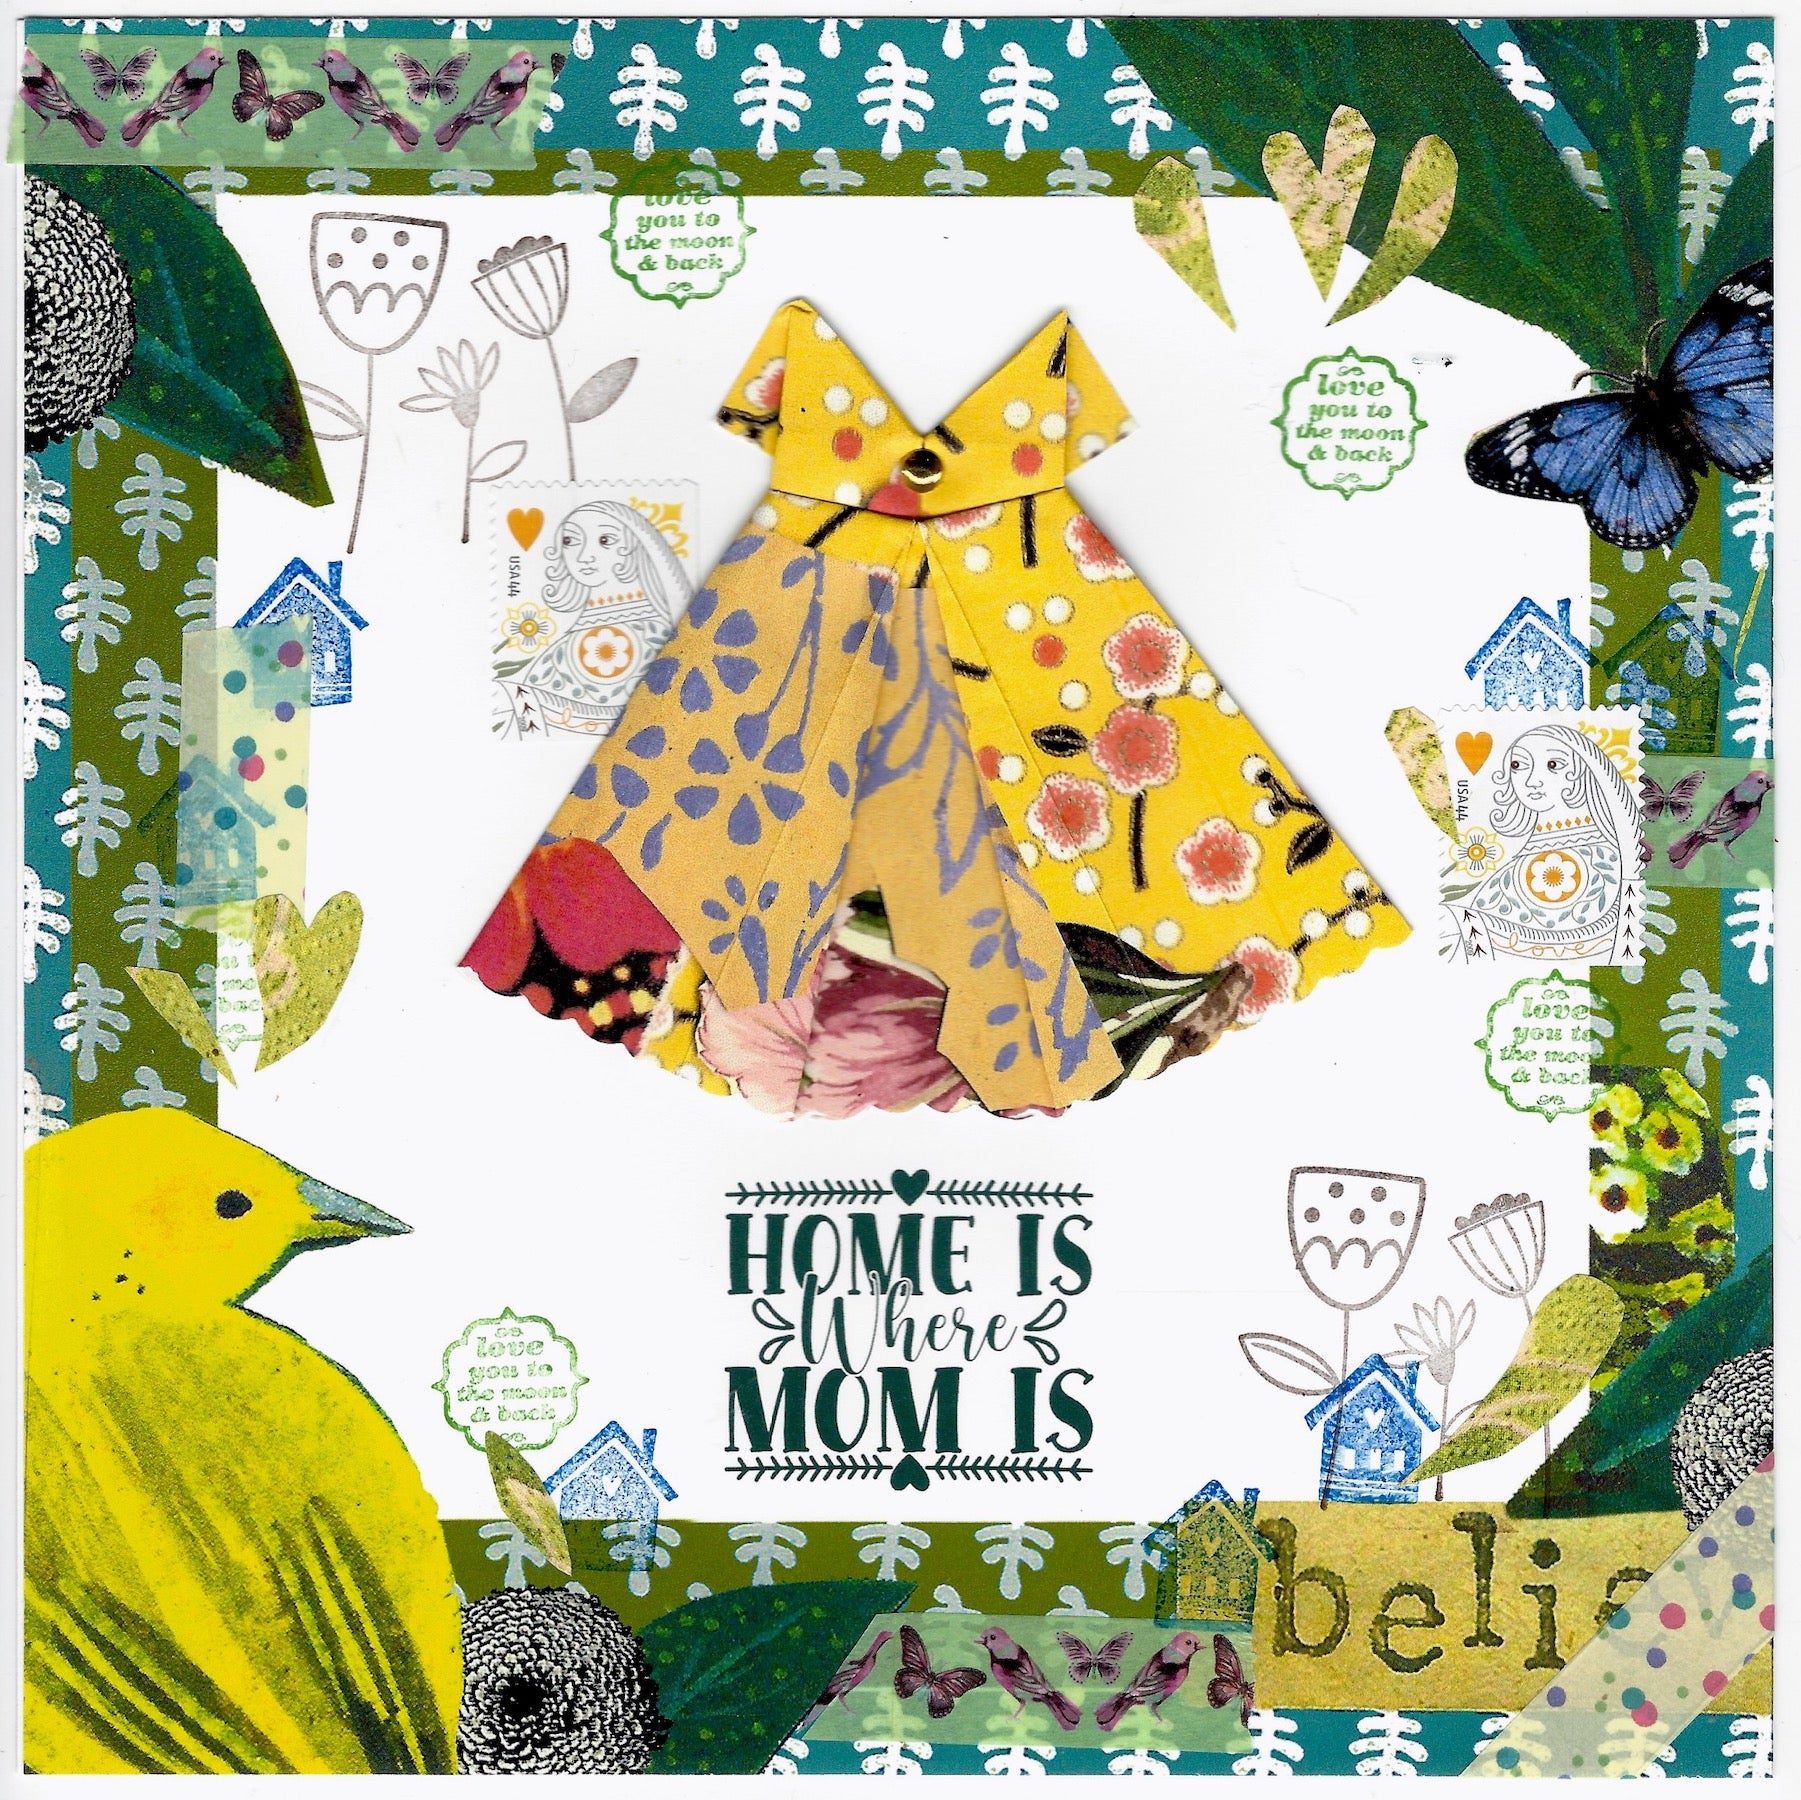 Framed Origami Dress Art - Home is where Mom is Virginia Fitzgerald